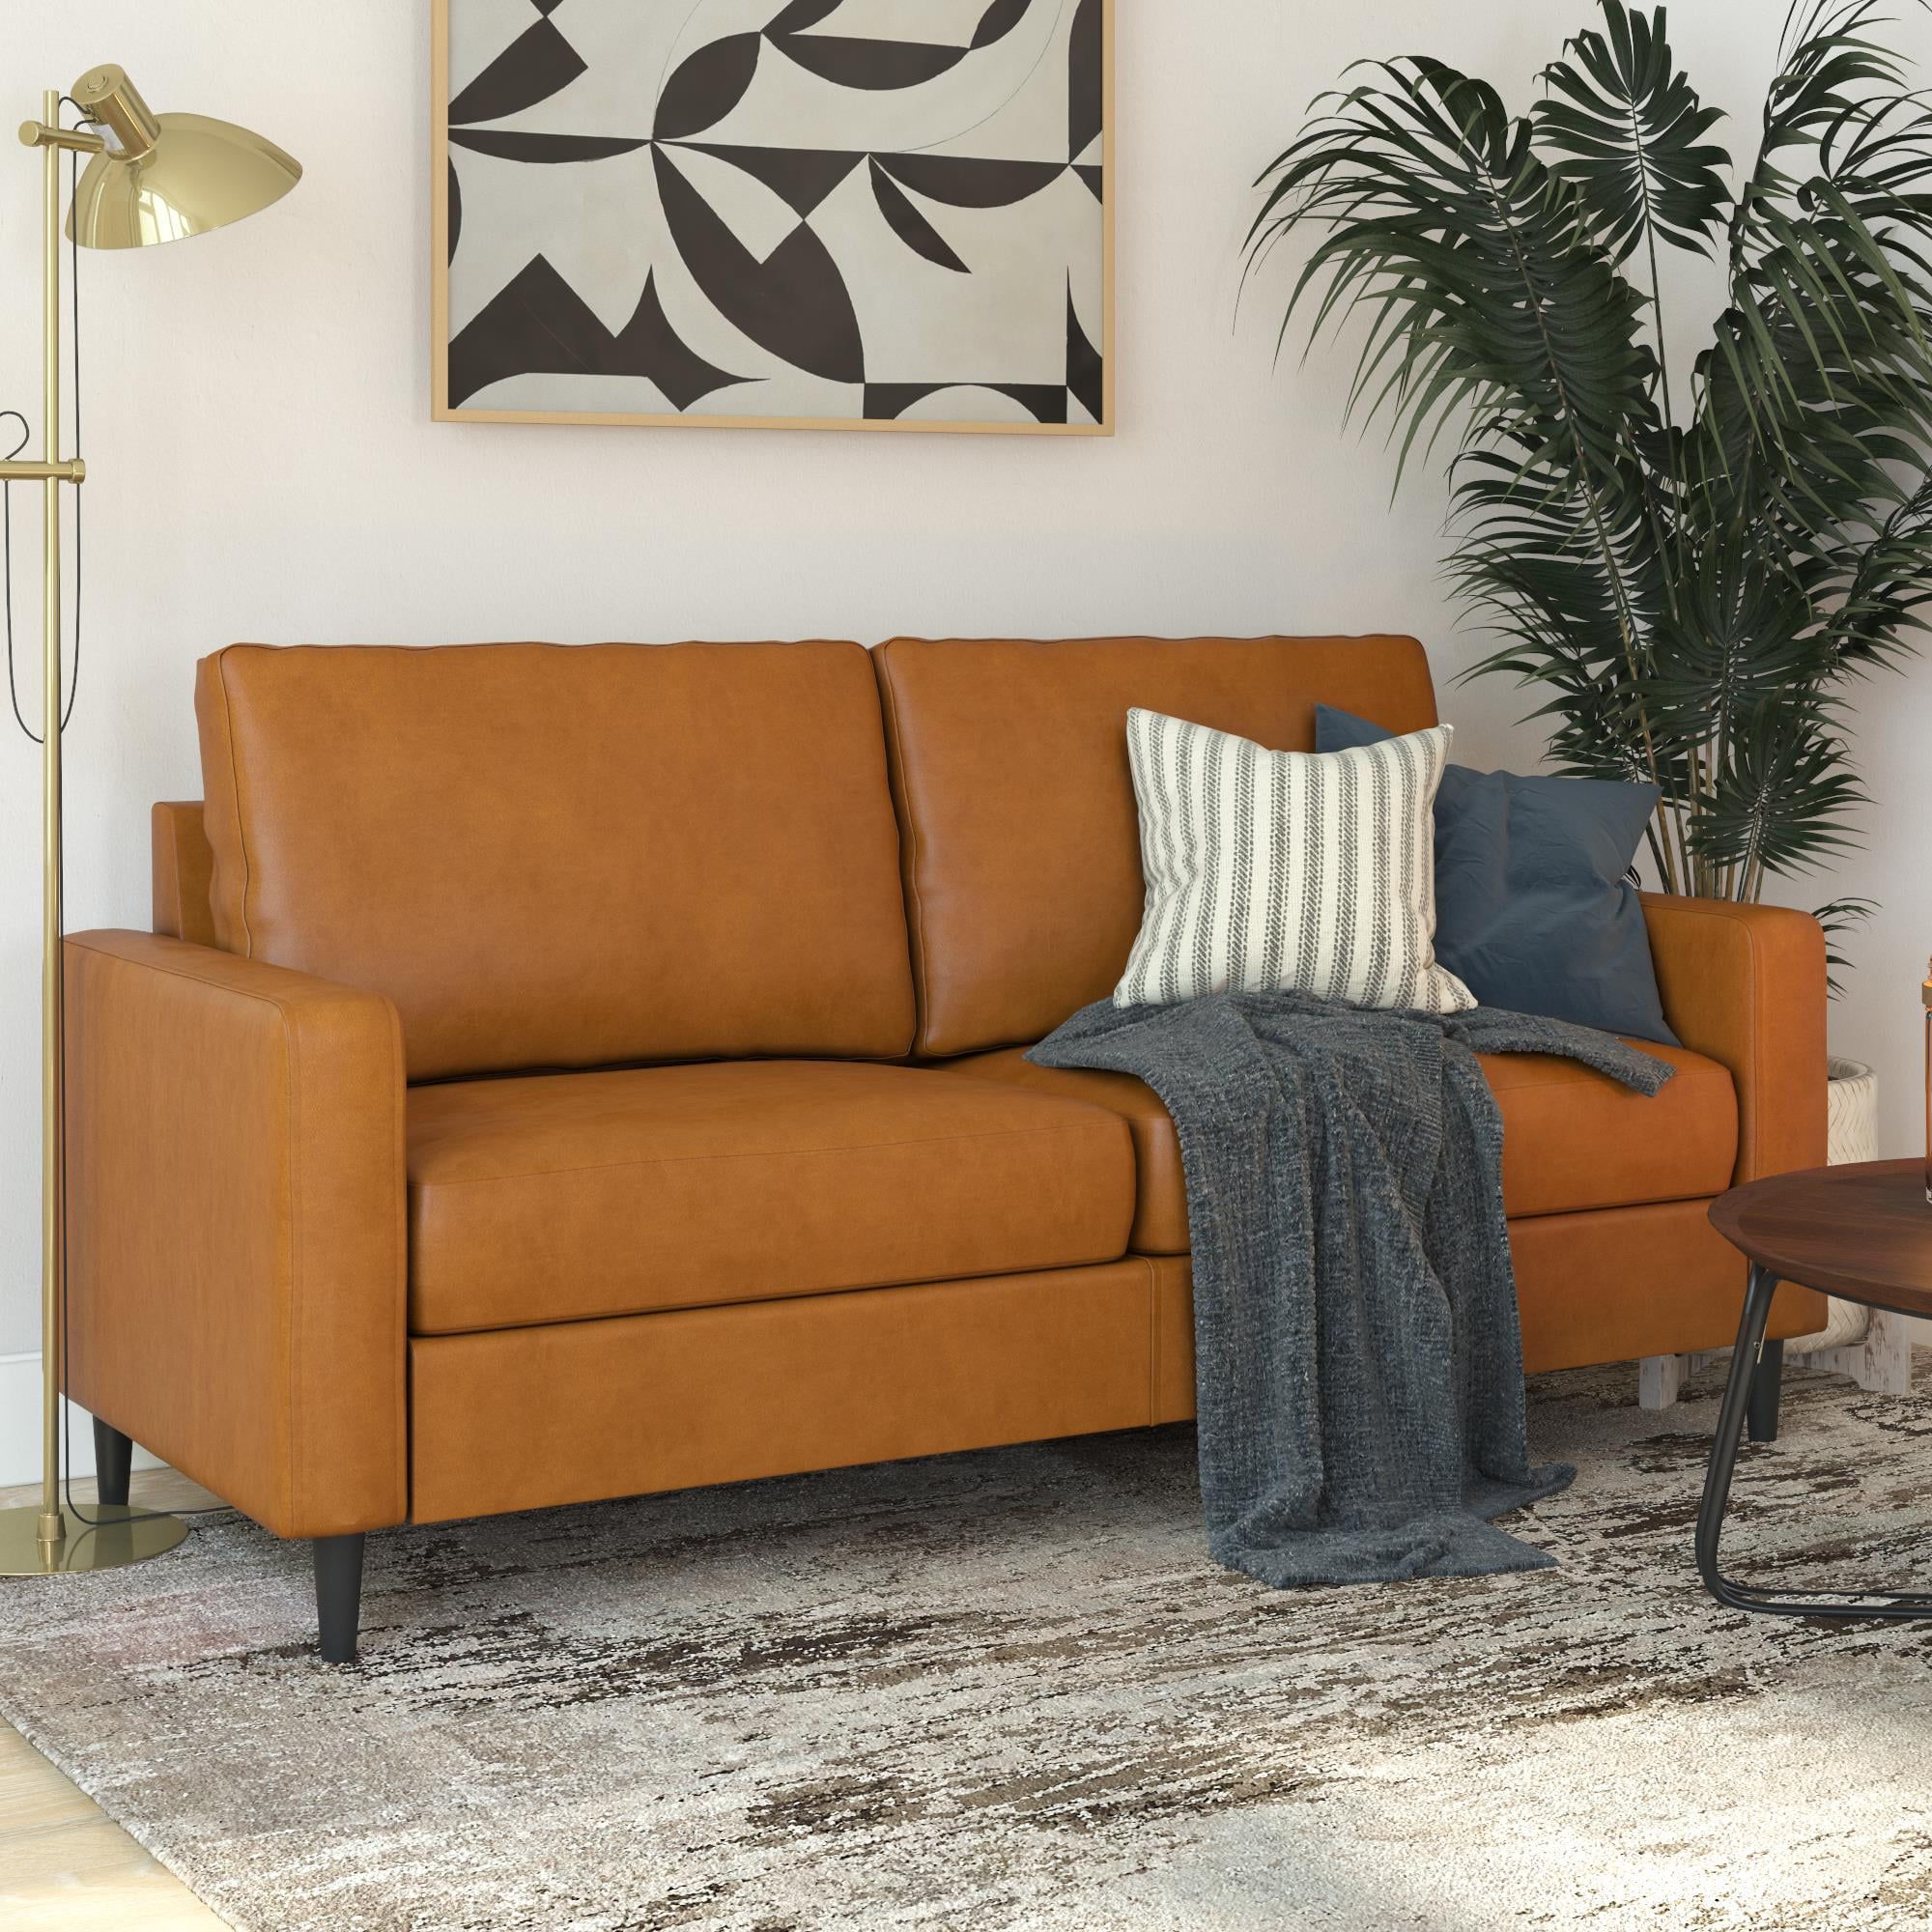 Dhp Connor Modern Sofa, Small Space Living Room Furniture, Camel Faux Inside Sofas For Compact Living (View 7 of 20)